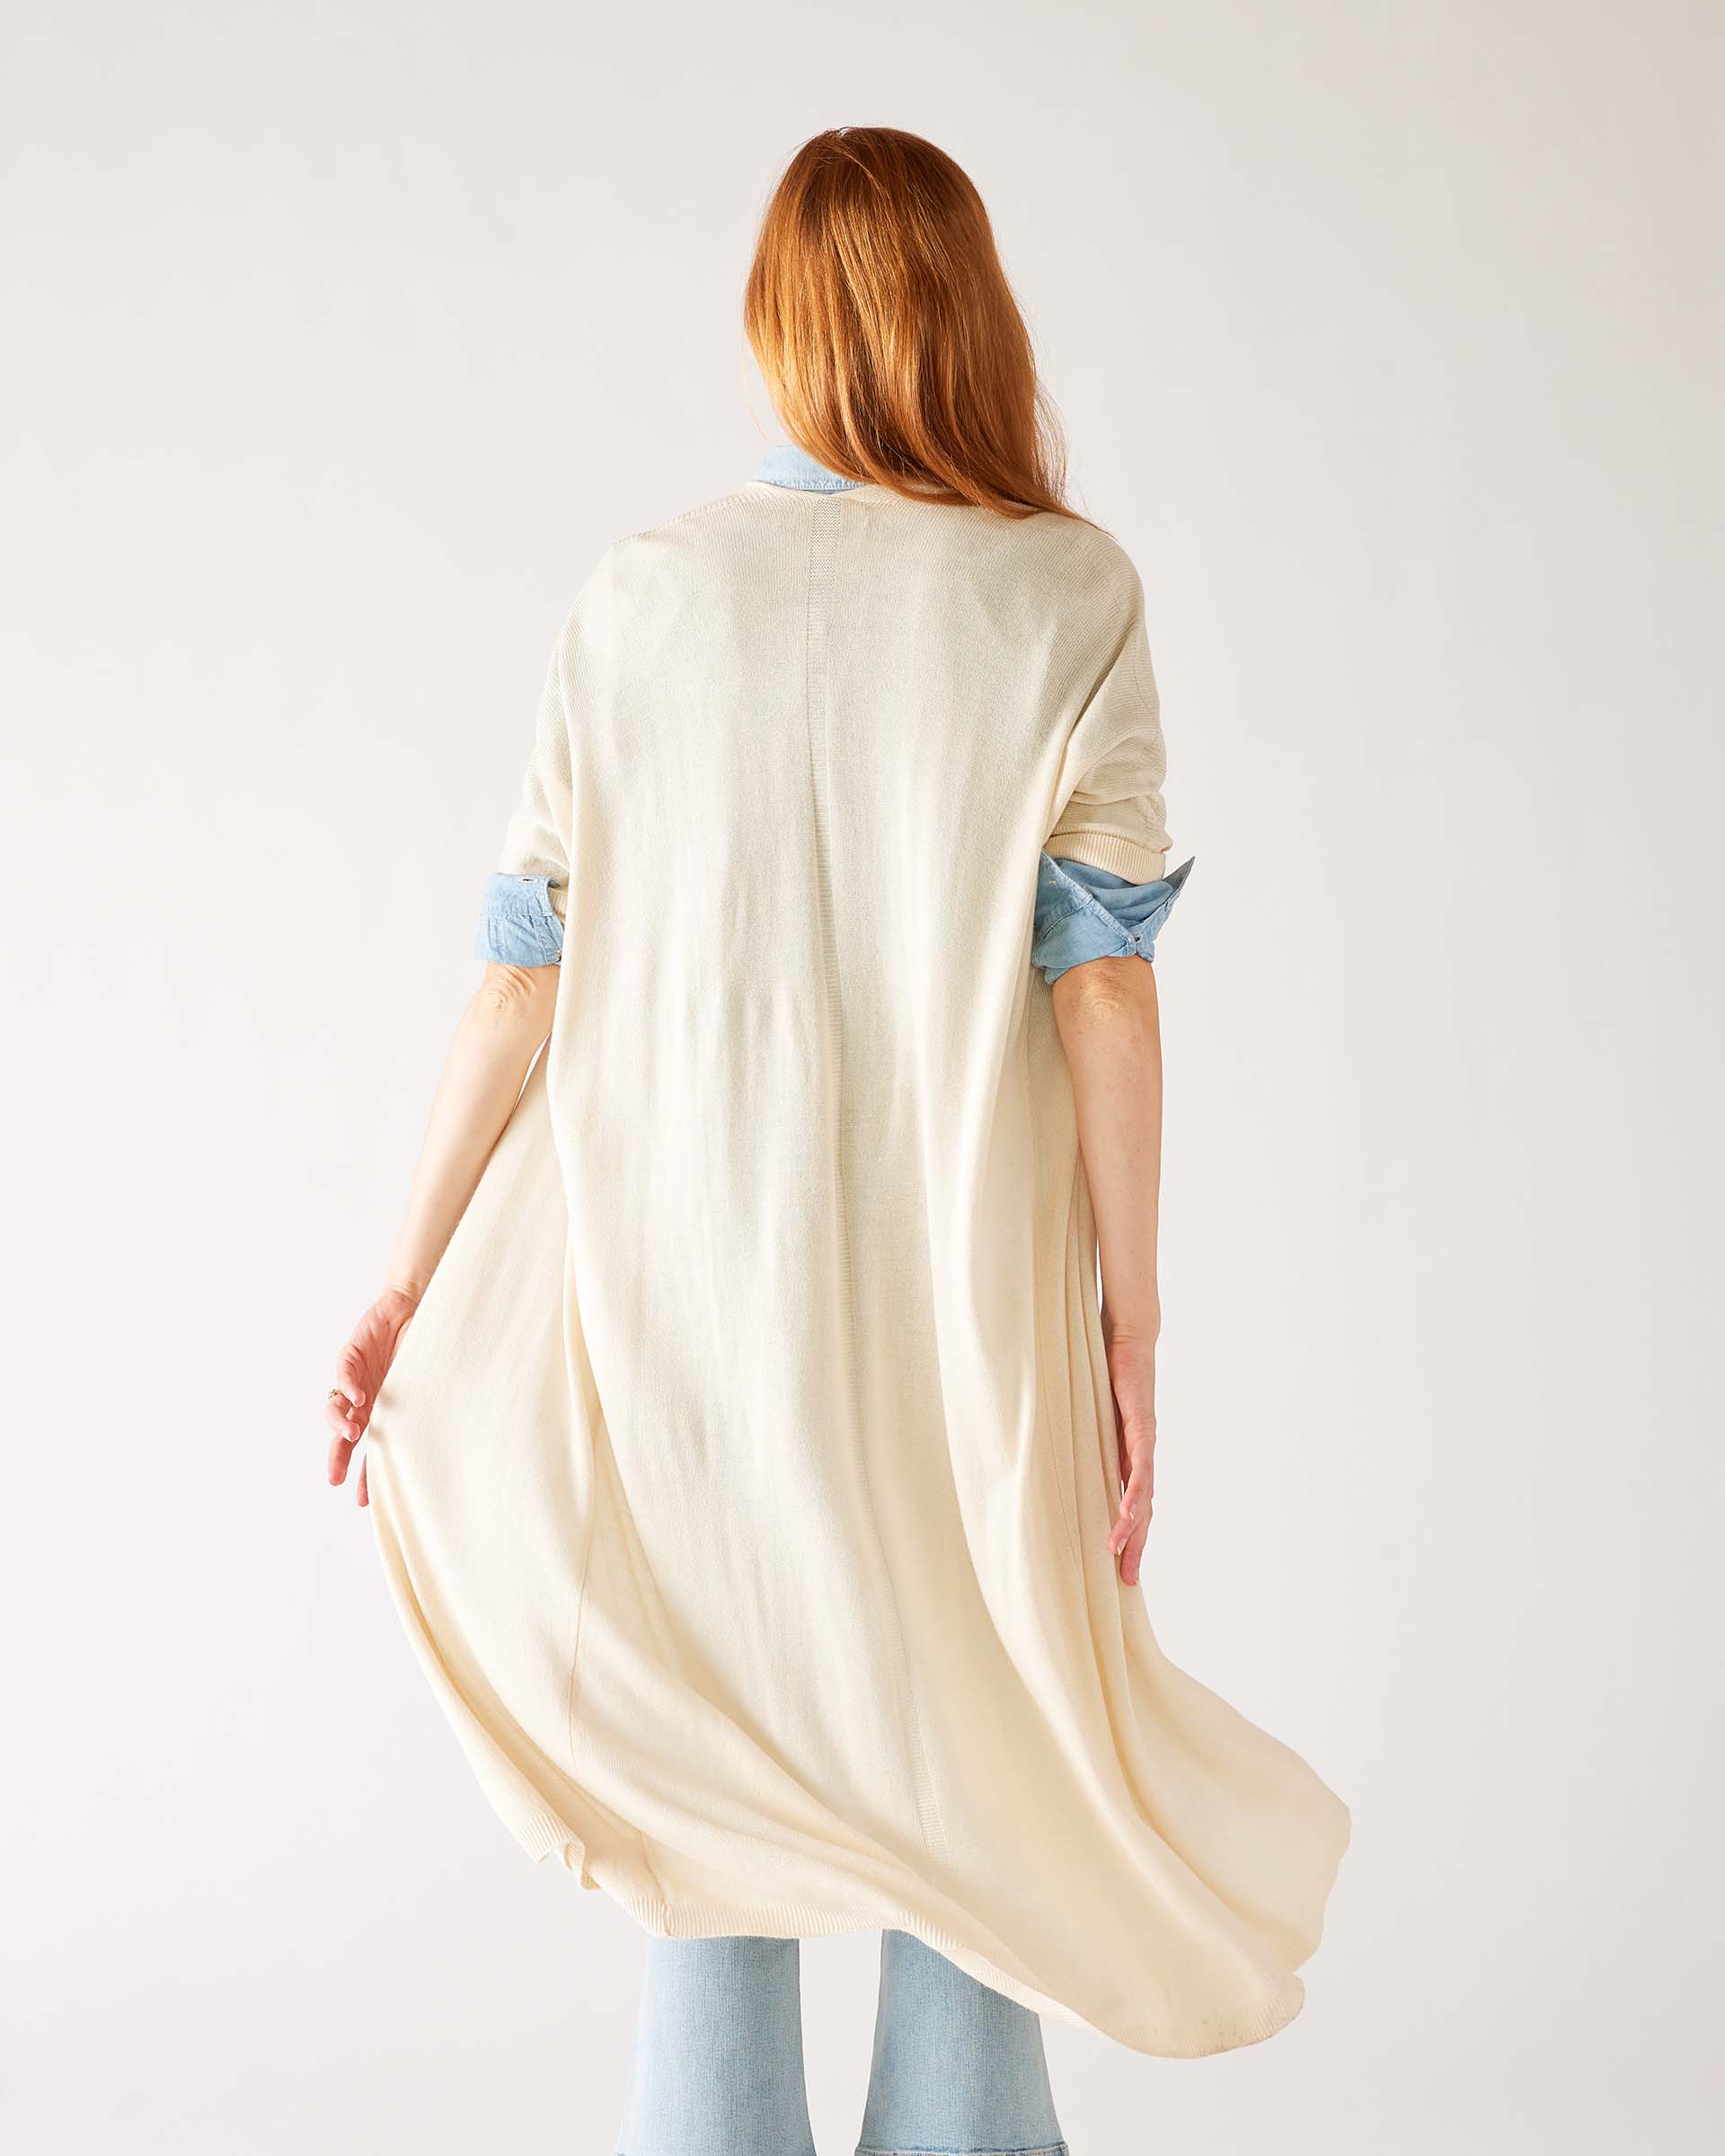 Womens White Lightweight Cuffed Elbow Length Sleeves Duster Flowing Rear View